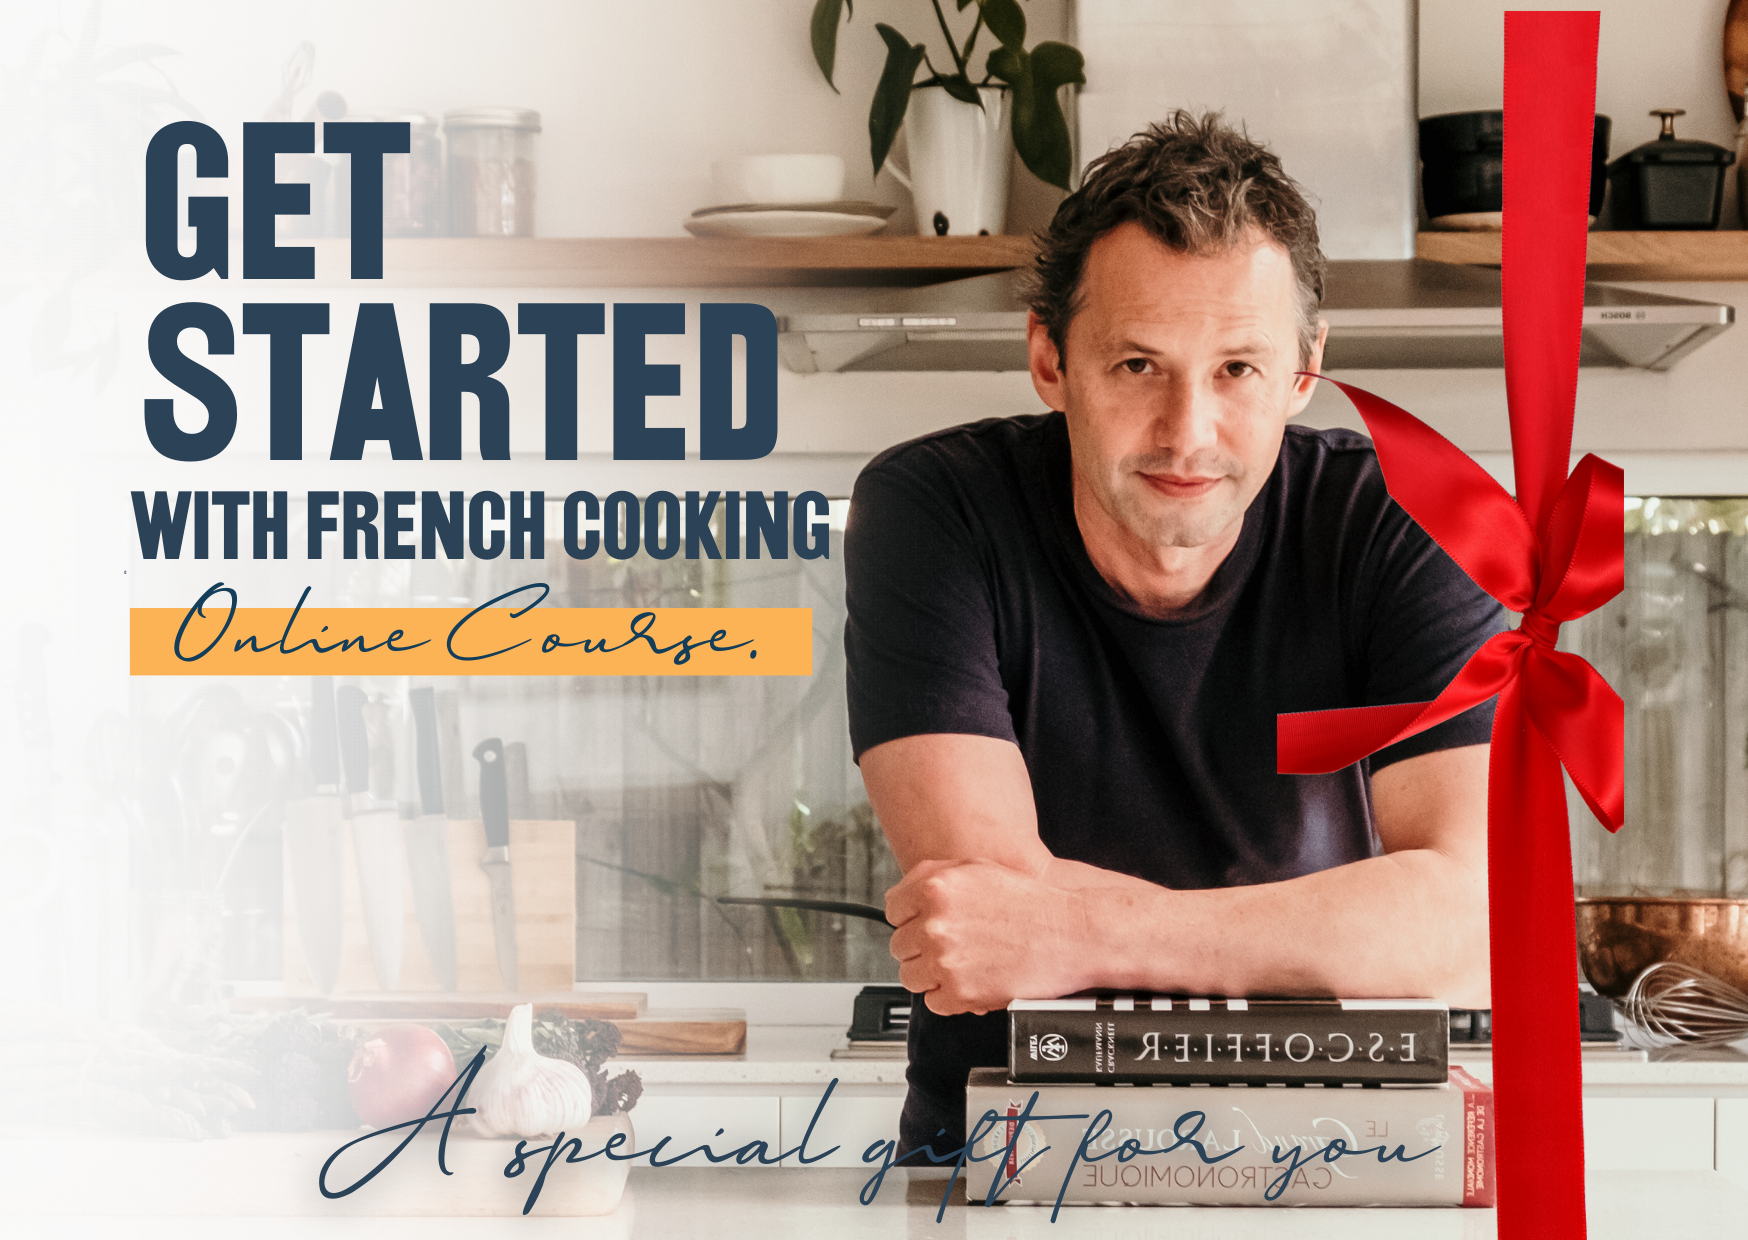 Get started with French cooking gift card